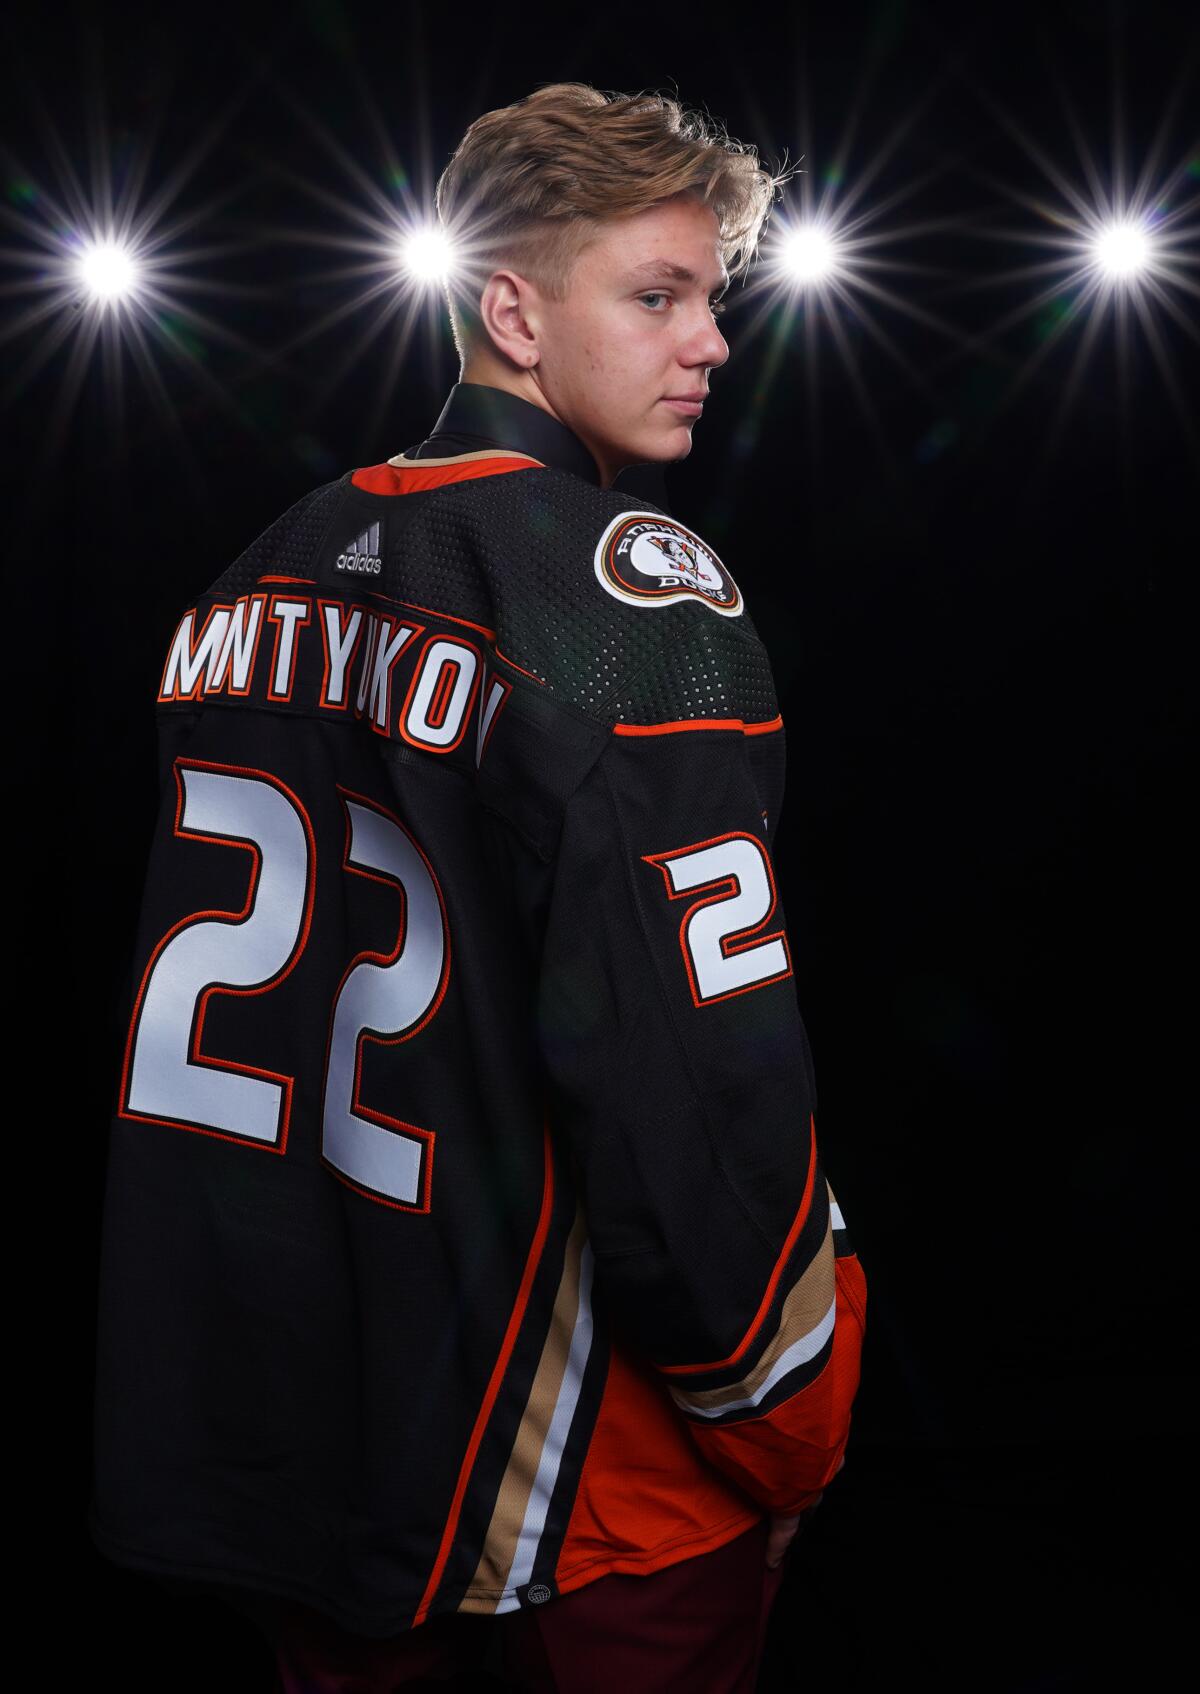 Pavel Mintyukov wears a Ducks jersey after being selected 10th overall by Anaheim.